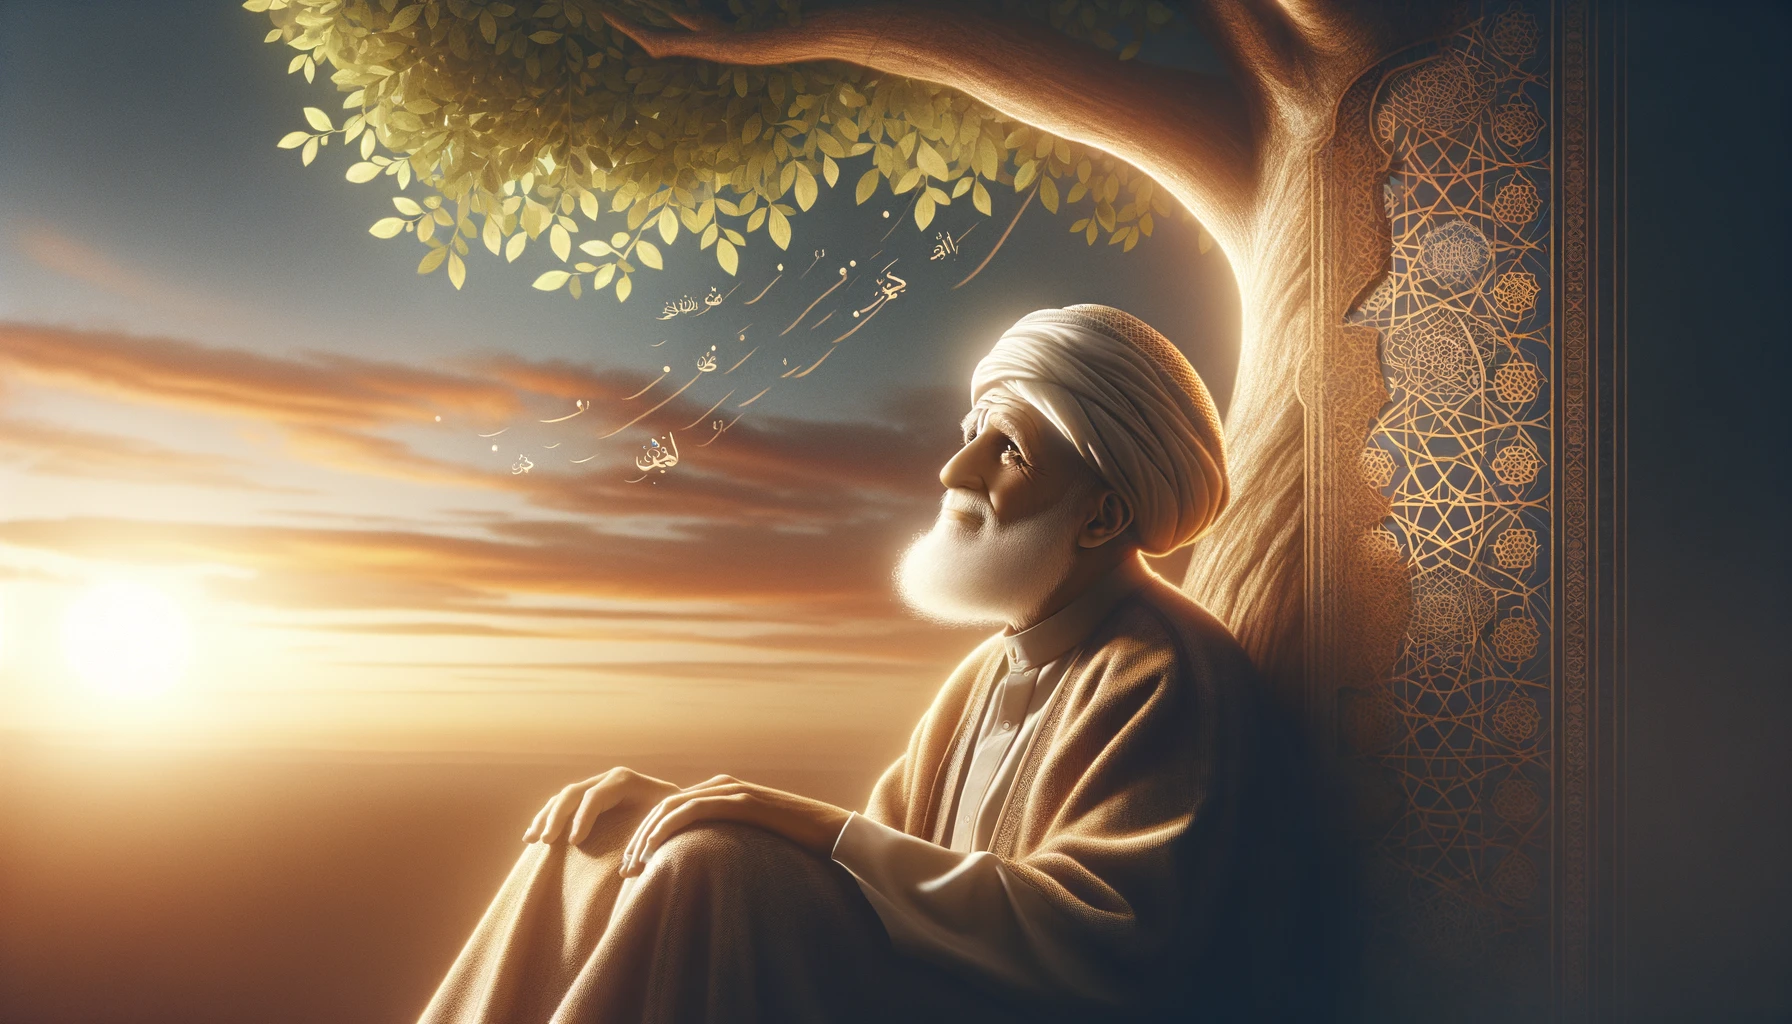 featuring an elderly wise man depicted as Middle Eastern, sitting under a tree in a contemplative and peaceful manner. The background has a soft sunset that adds to the tranquil and uplifting atmosphere. This image is designed to convey a sense of wisdom, gratitude, and spiritual connection, suitable for your article about thanking Allah.